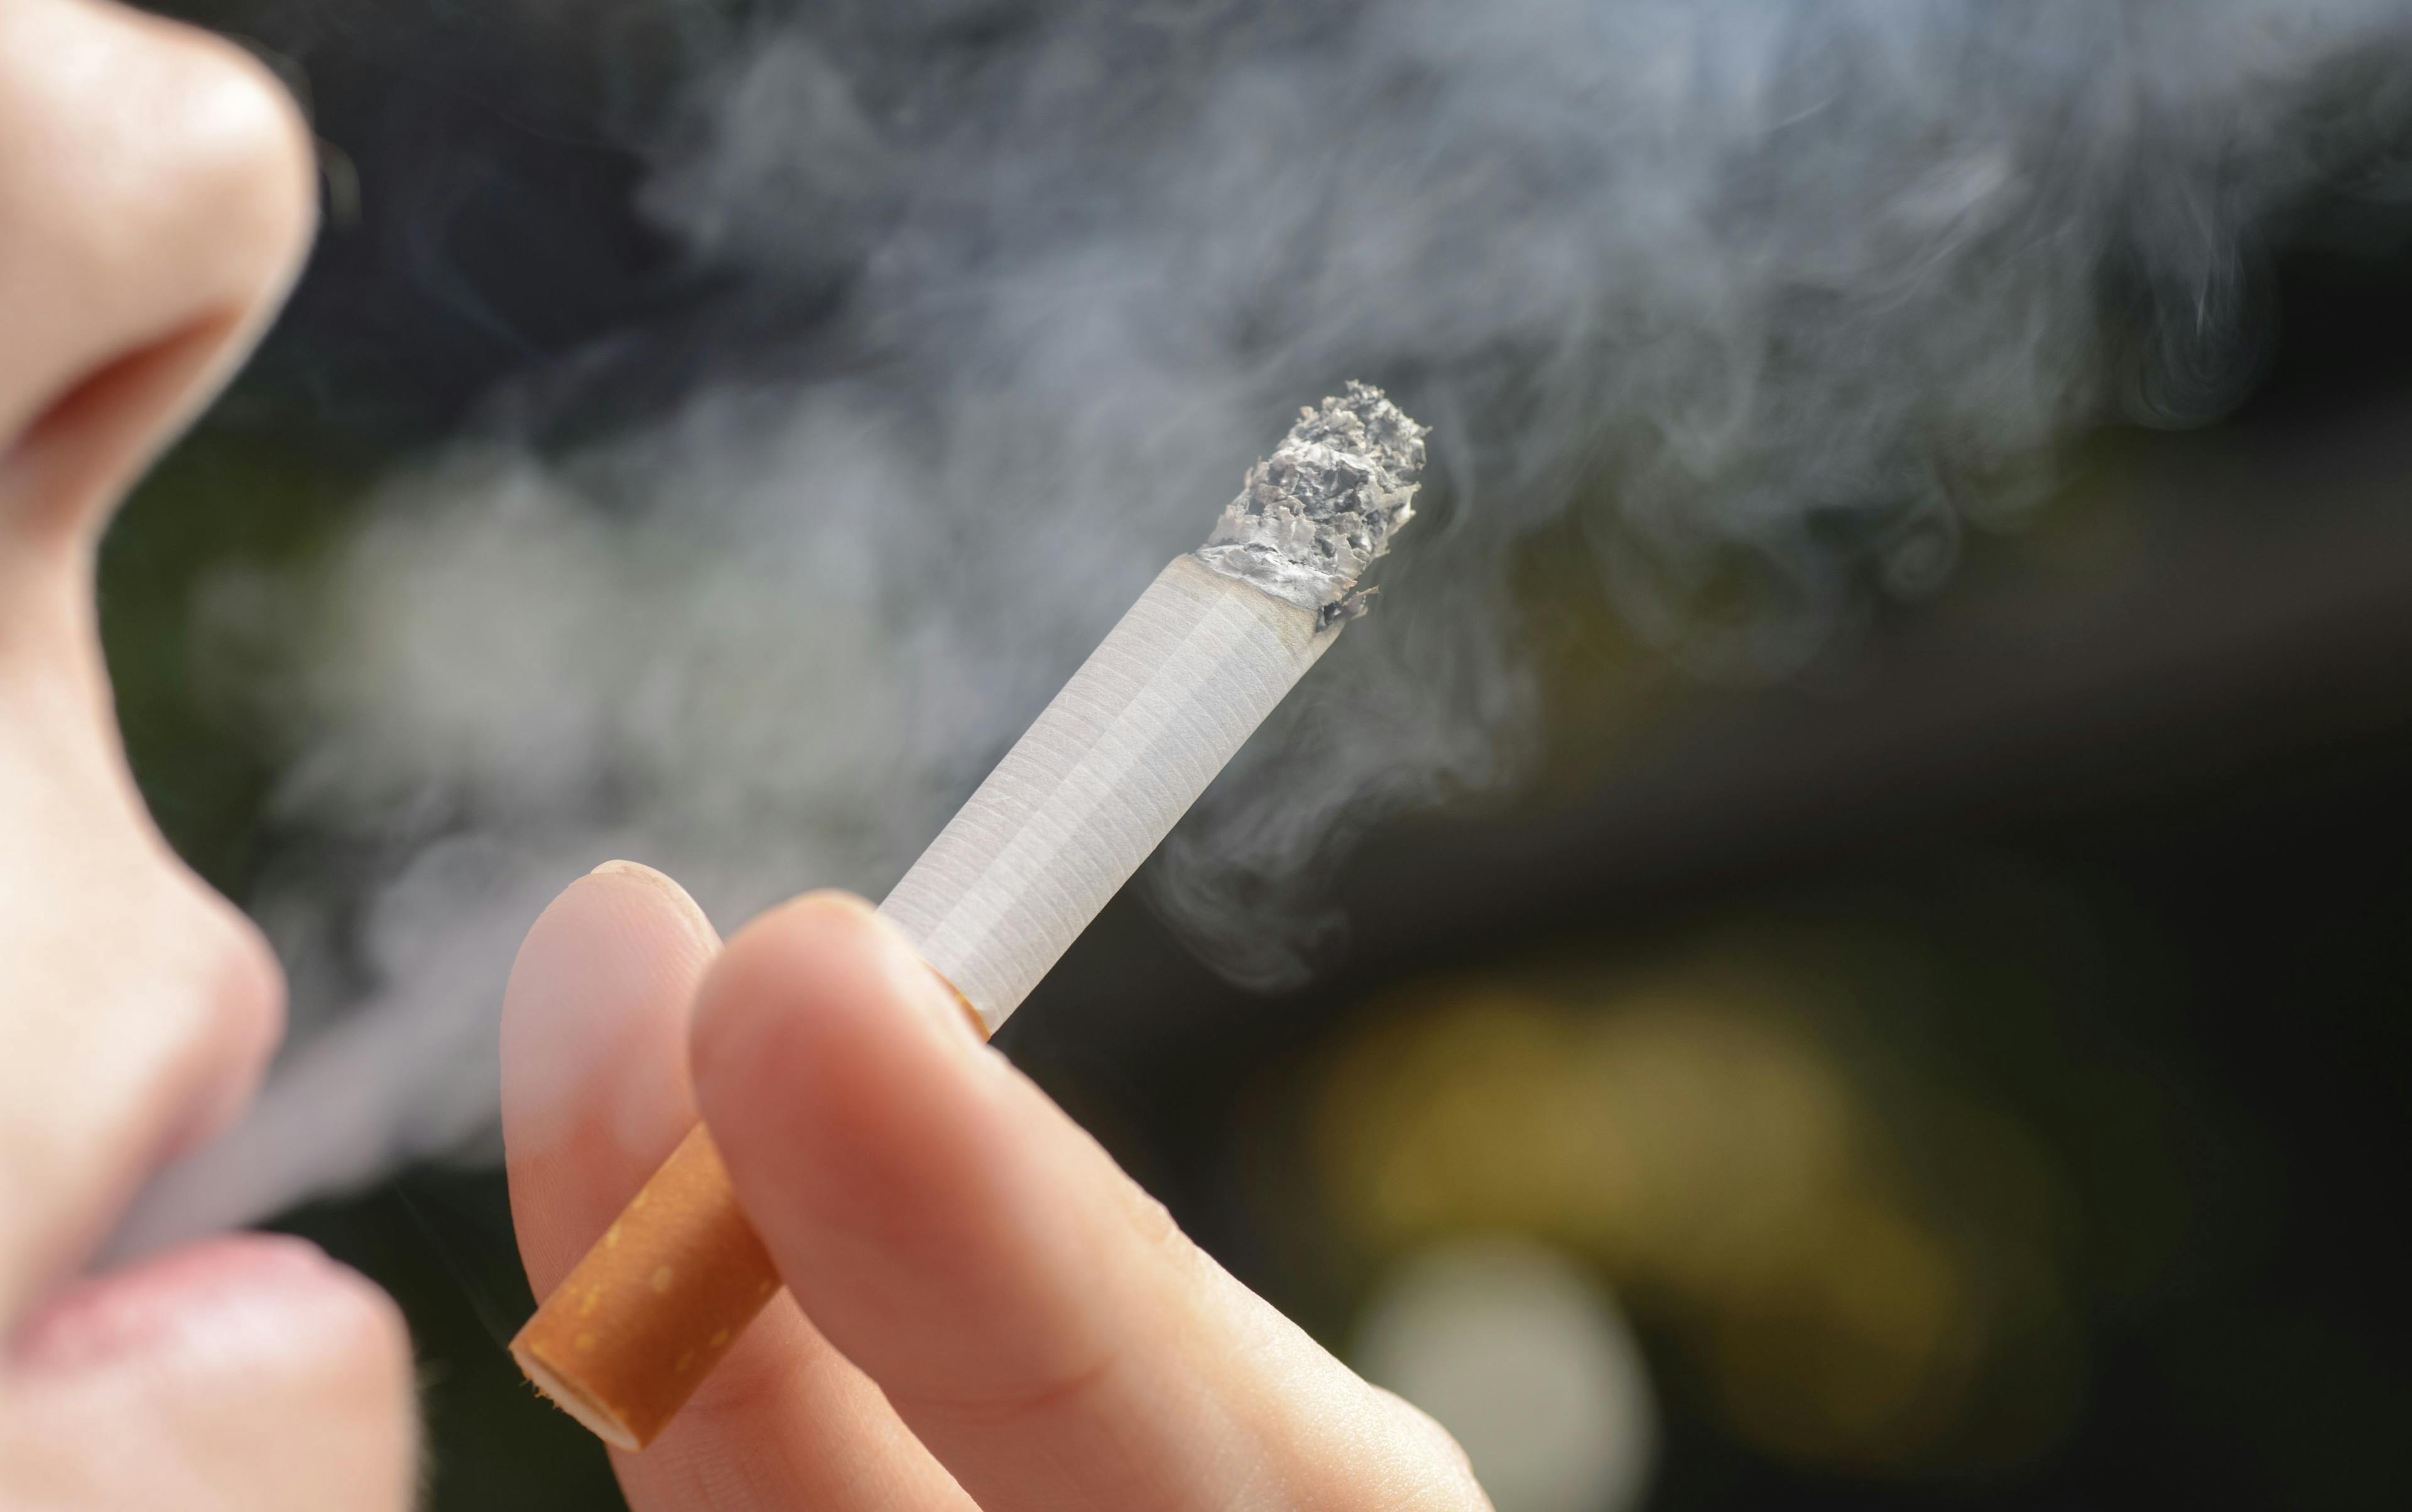 Study: Smoking Is Worse for the Heart Than Previously Thought